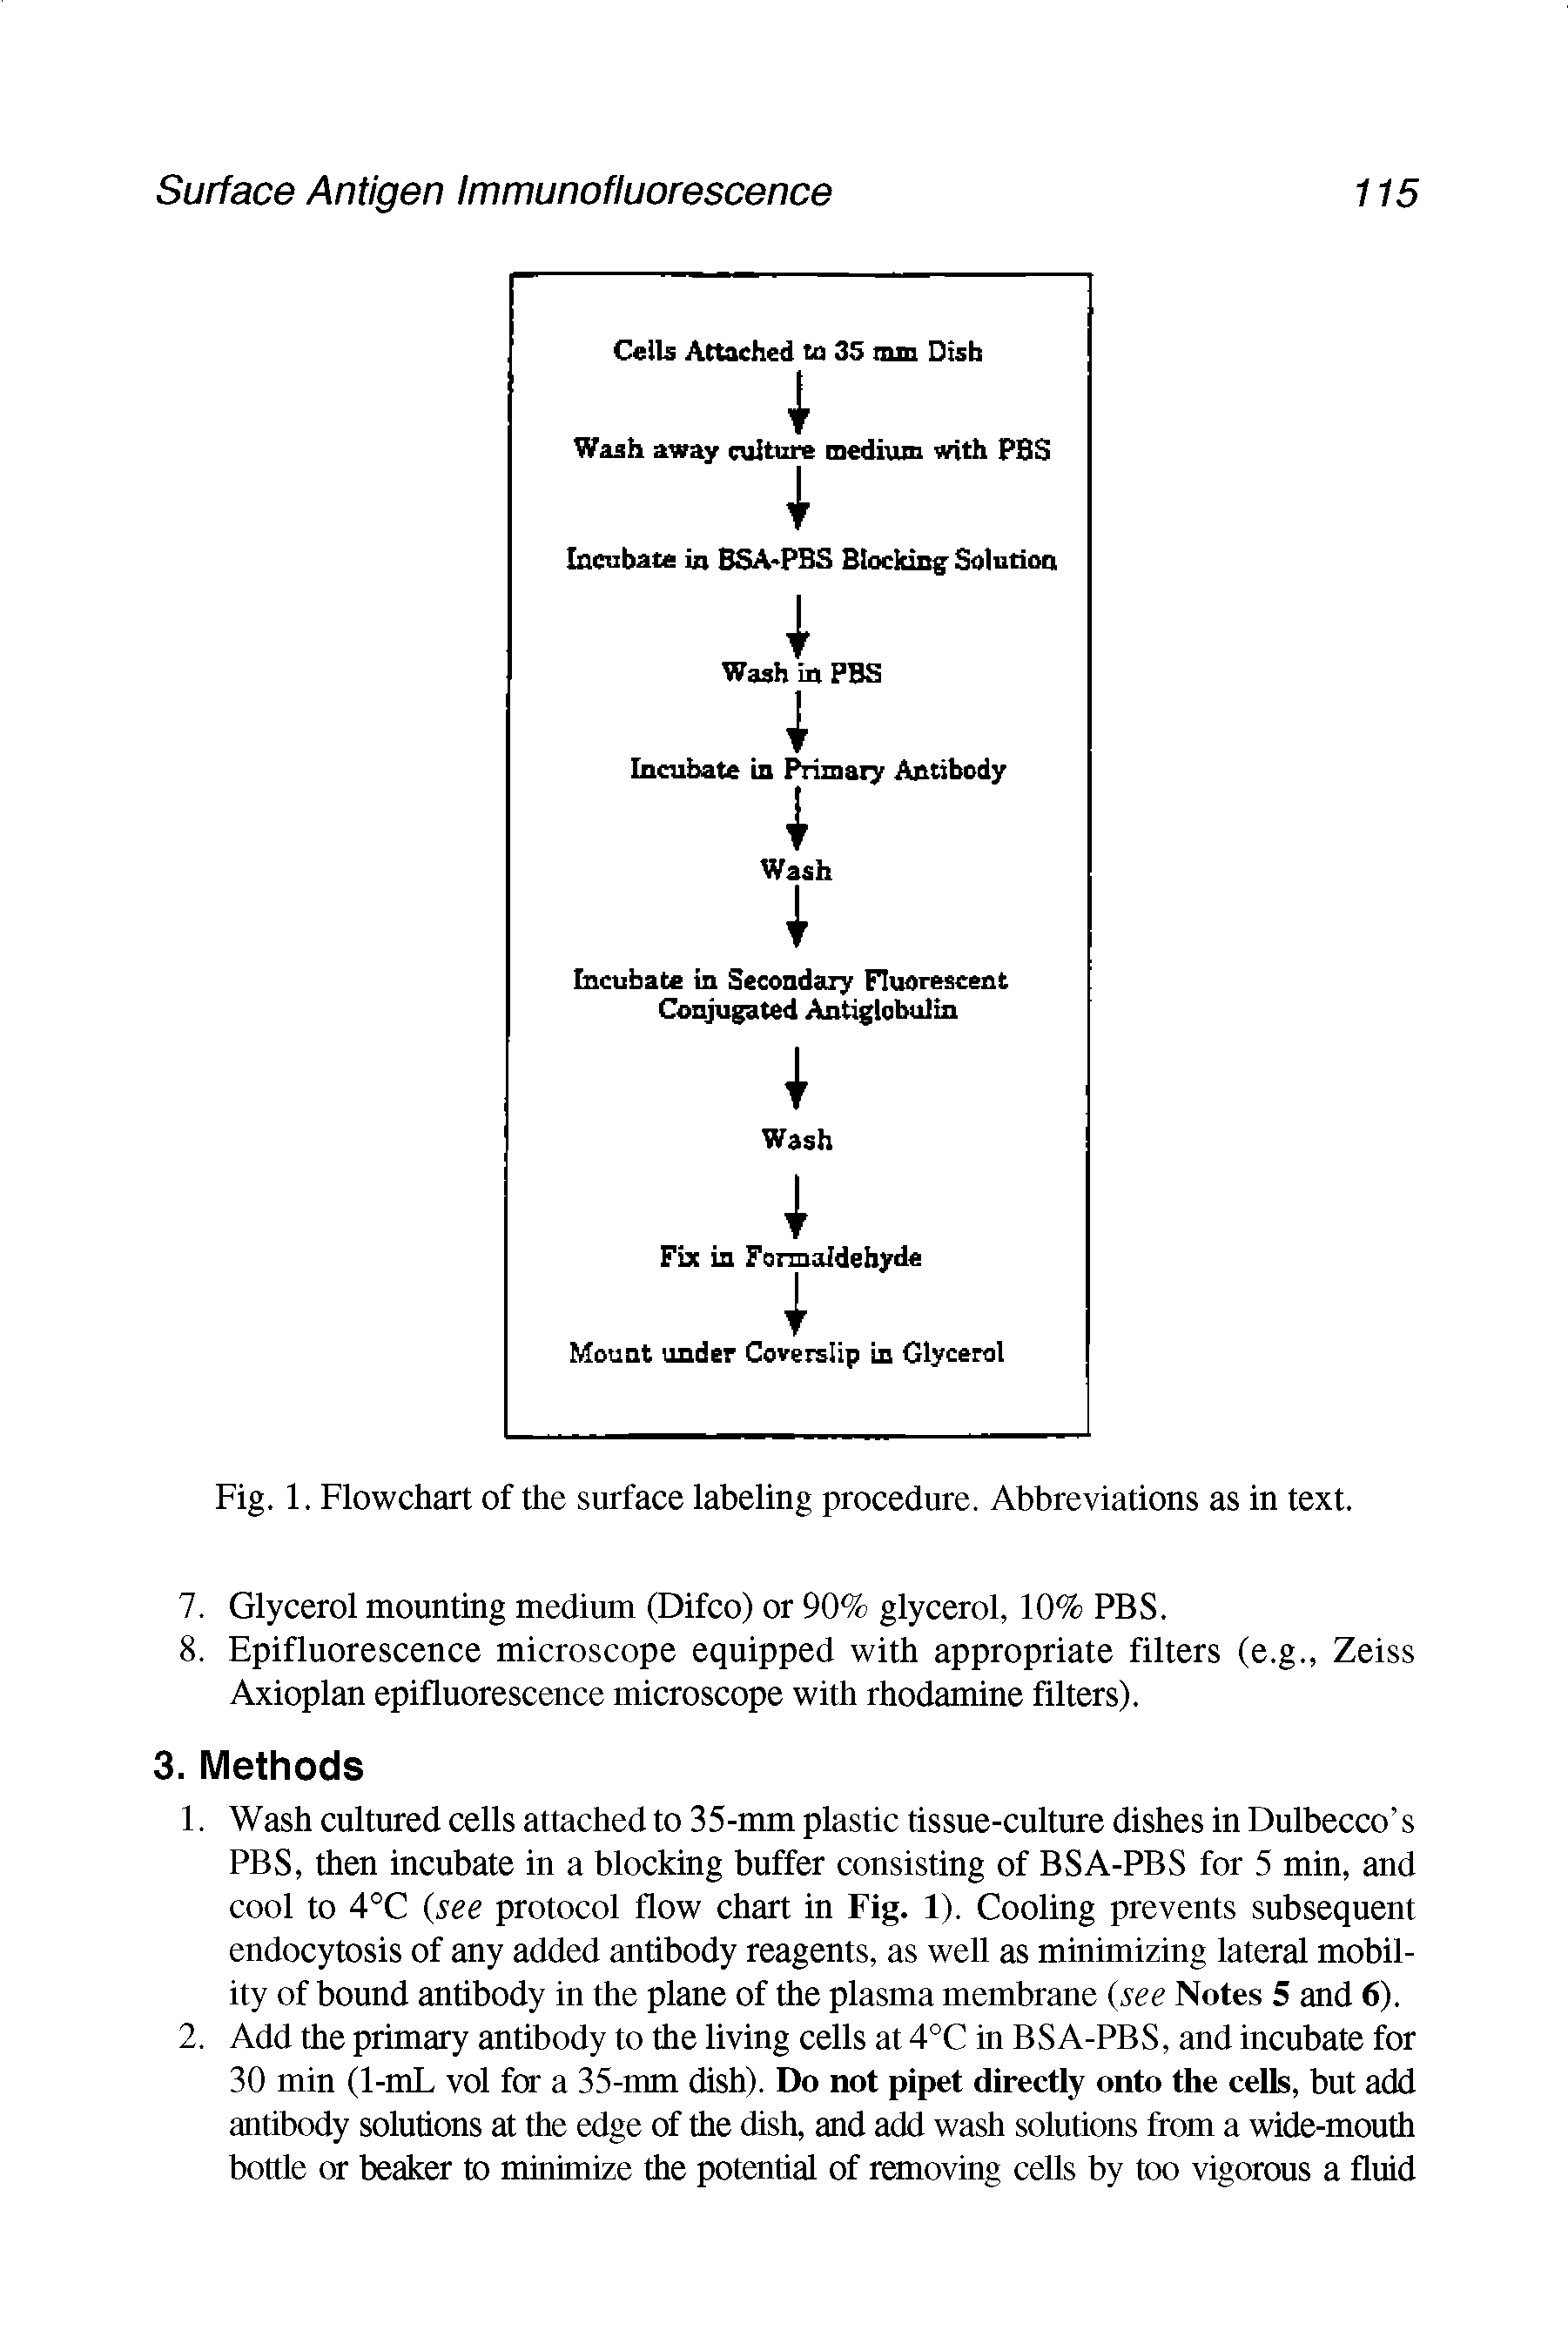 Fig. 1. Flowchart of the surface labeling procedure. Abbreviations as in text.